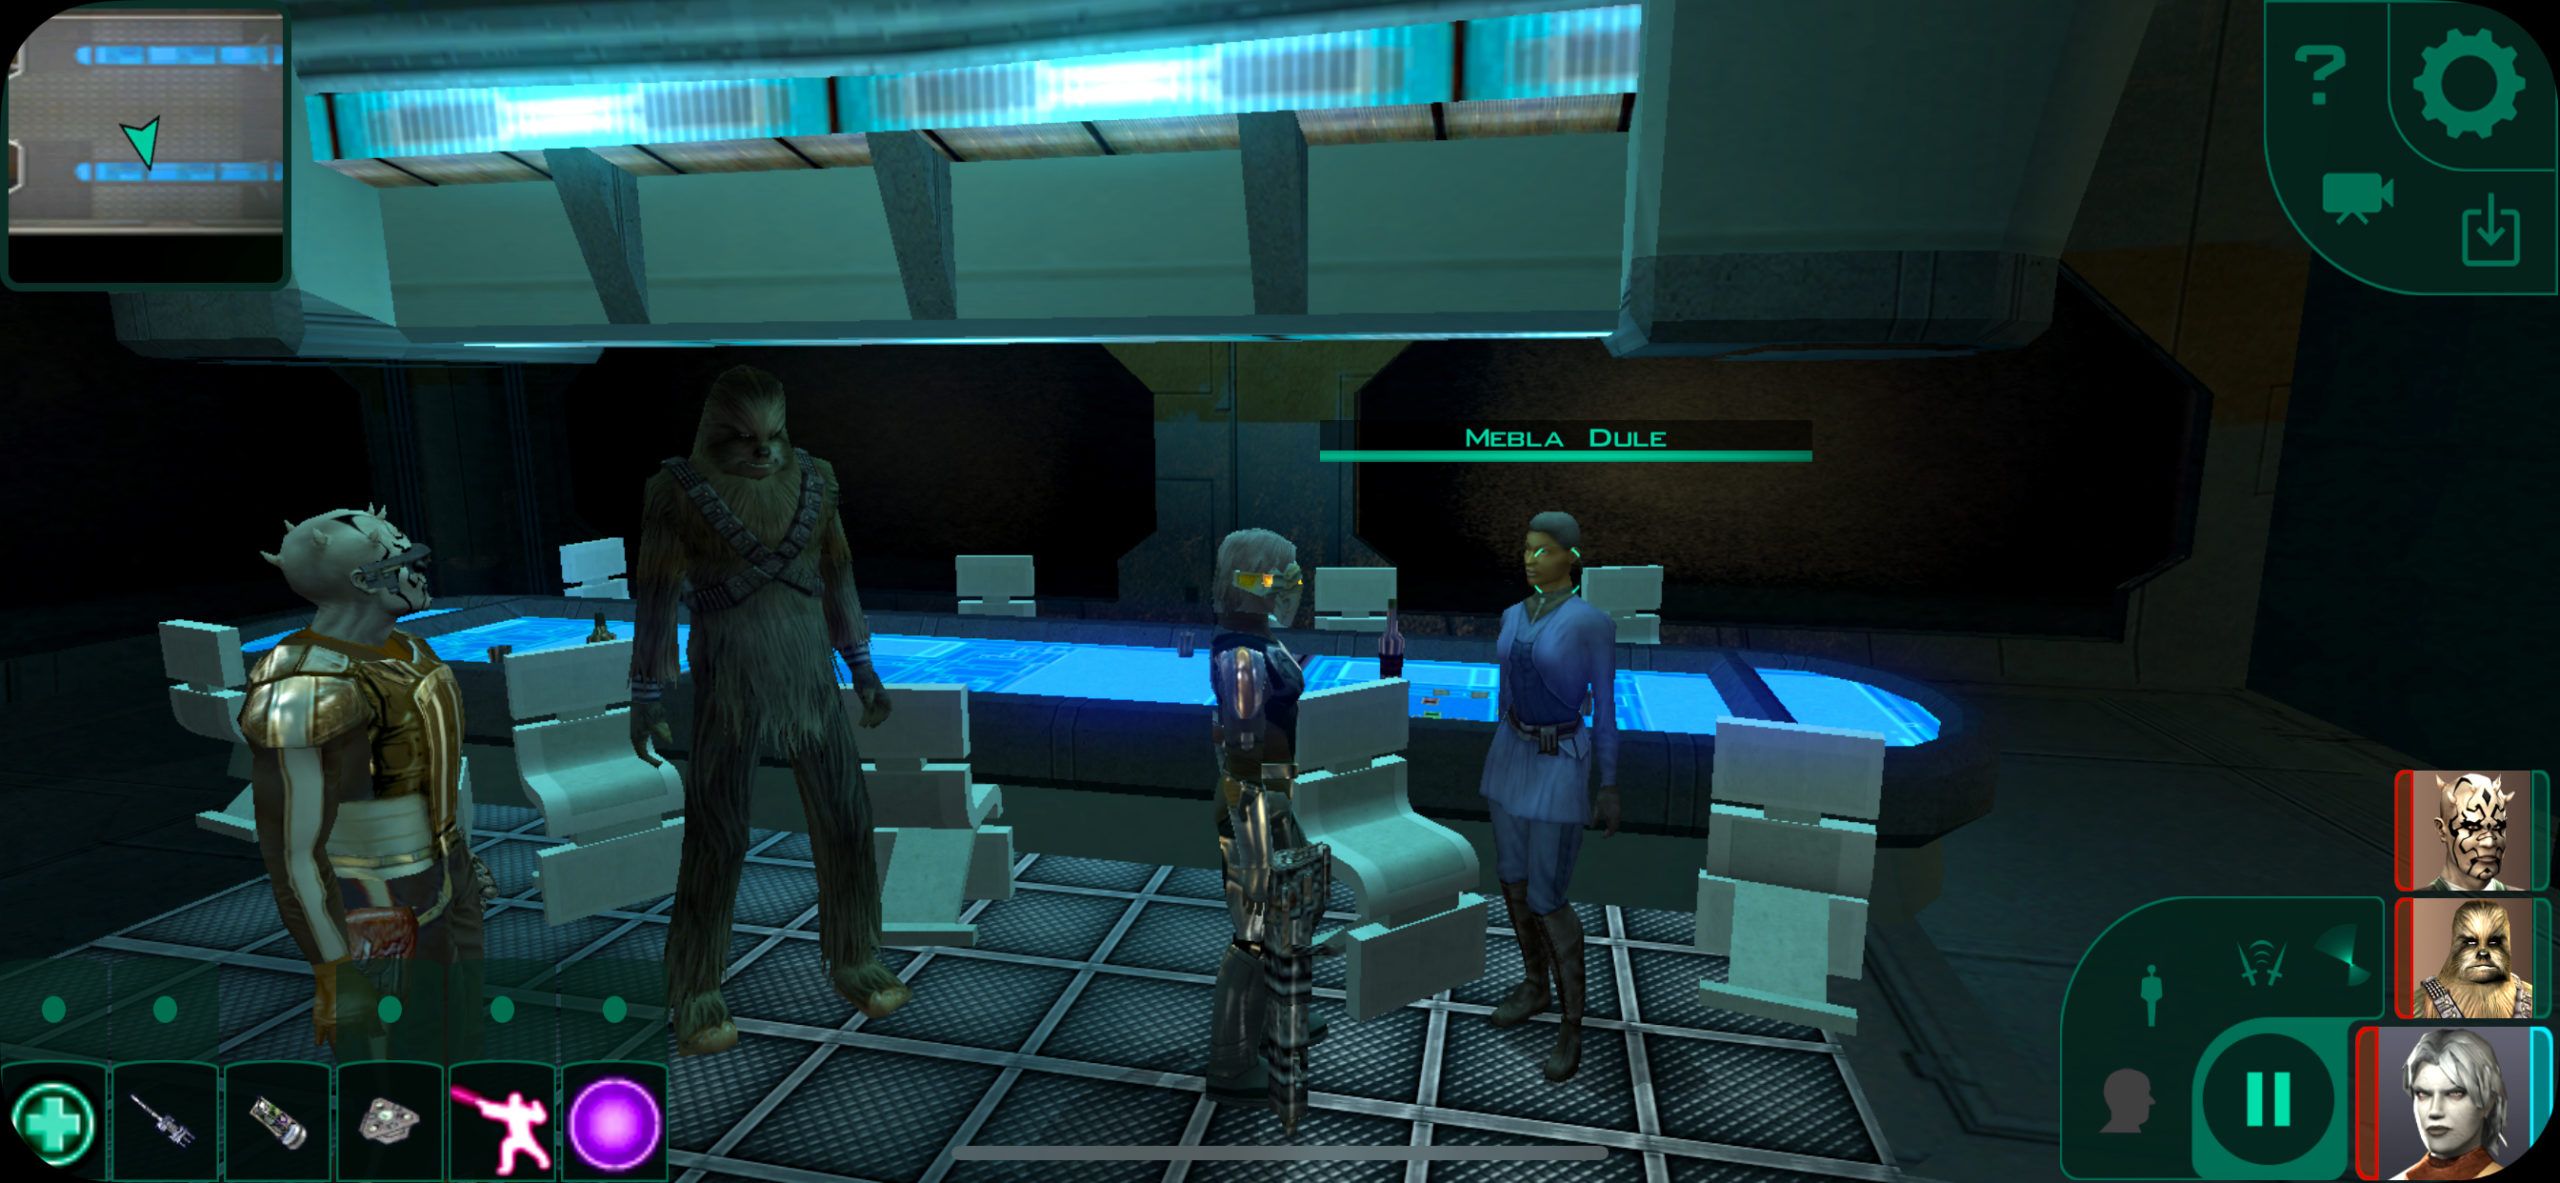 star wars knights of the old republic 2 torrent hd